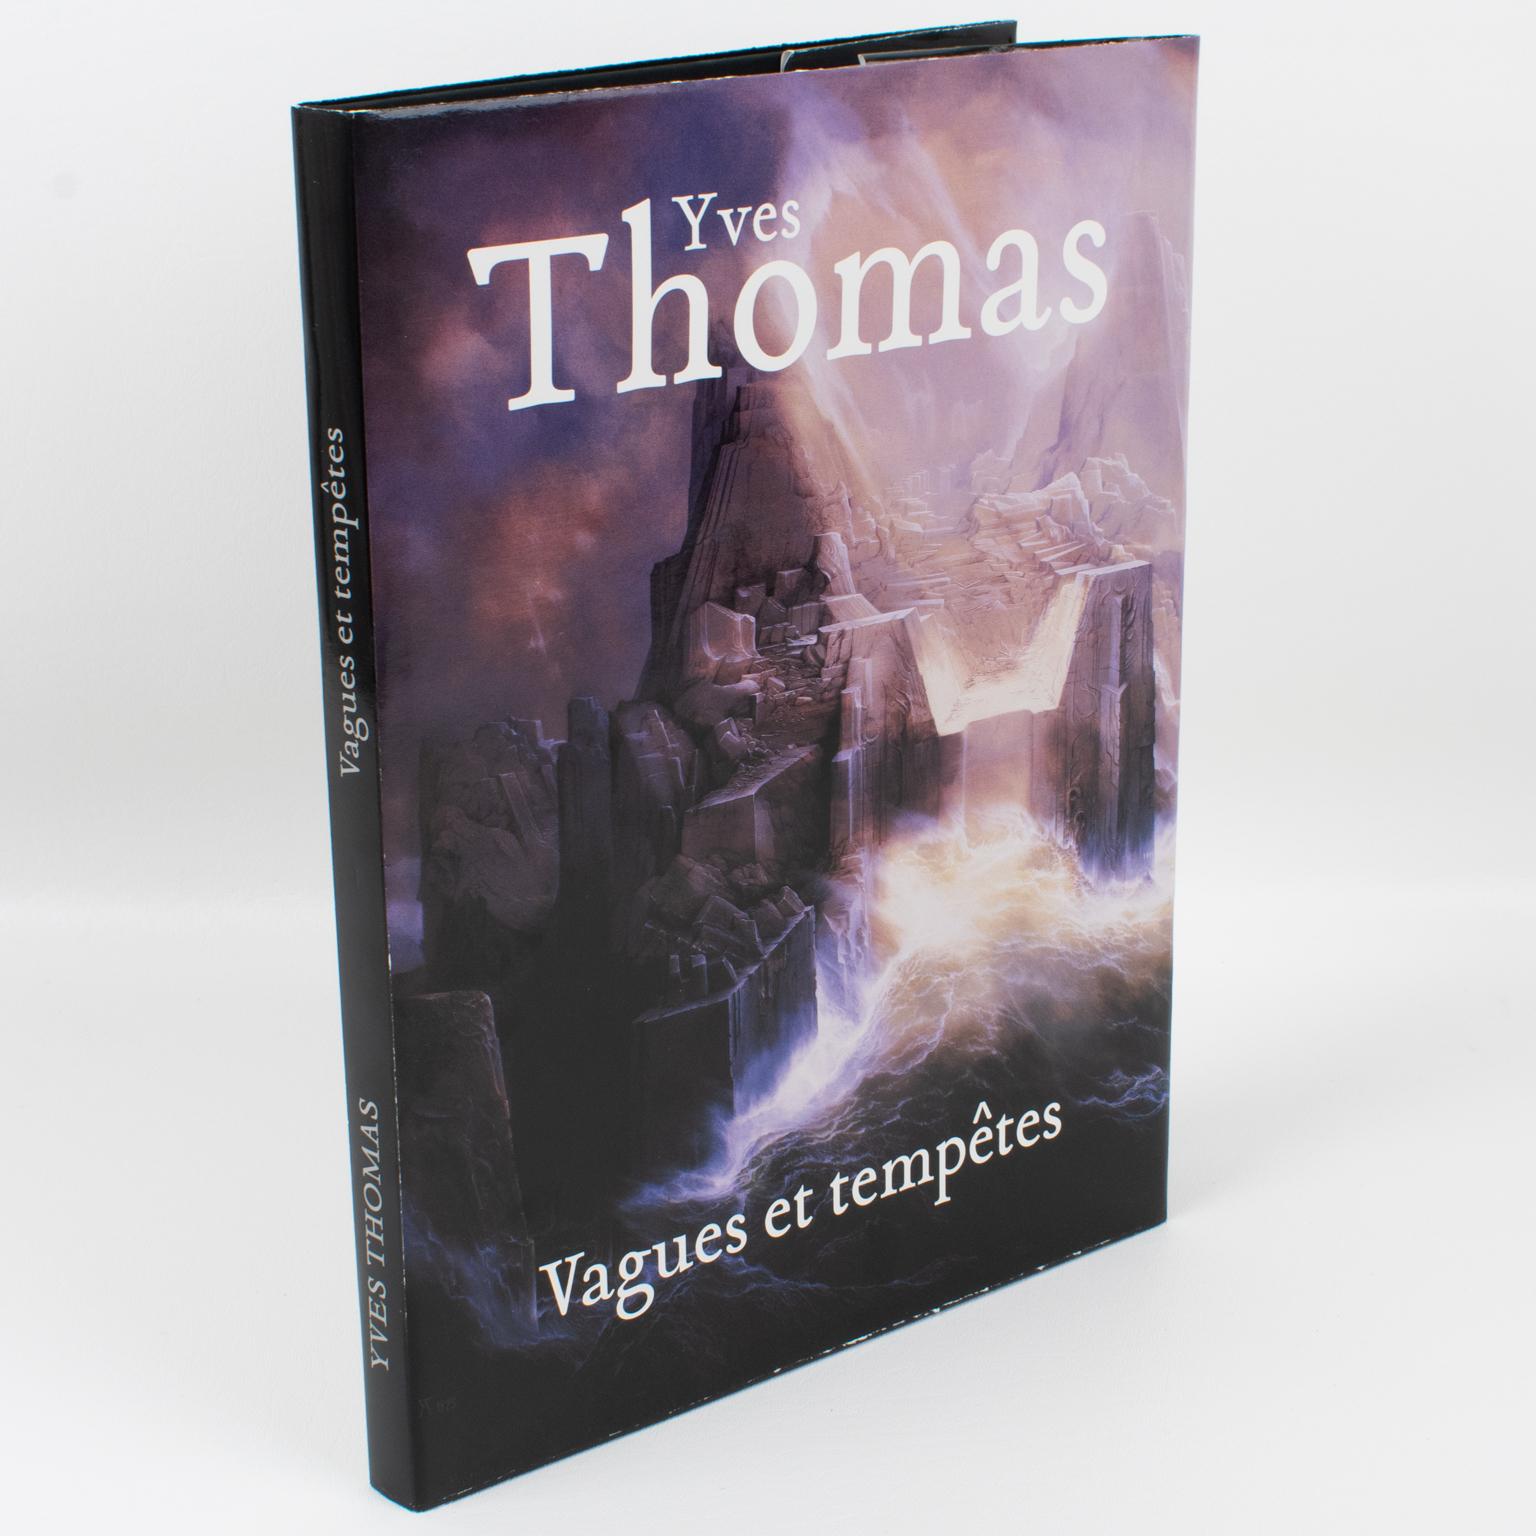 Yves Thomas, Vagues et Tempetes (Waves and Storms), French-English book by Yves Thomas, 2011.
Yves Thomas is a recognized listed French artist born in Normandy, France, in 1937. 
The most beautiful works of Yves Thomas have something musical,